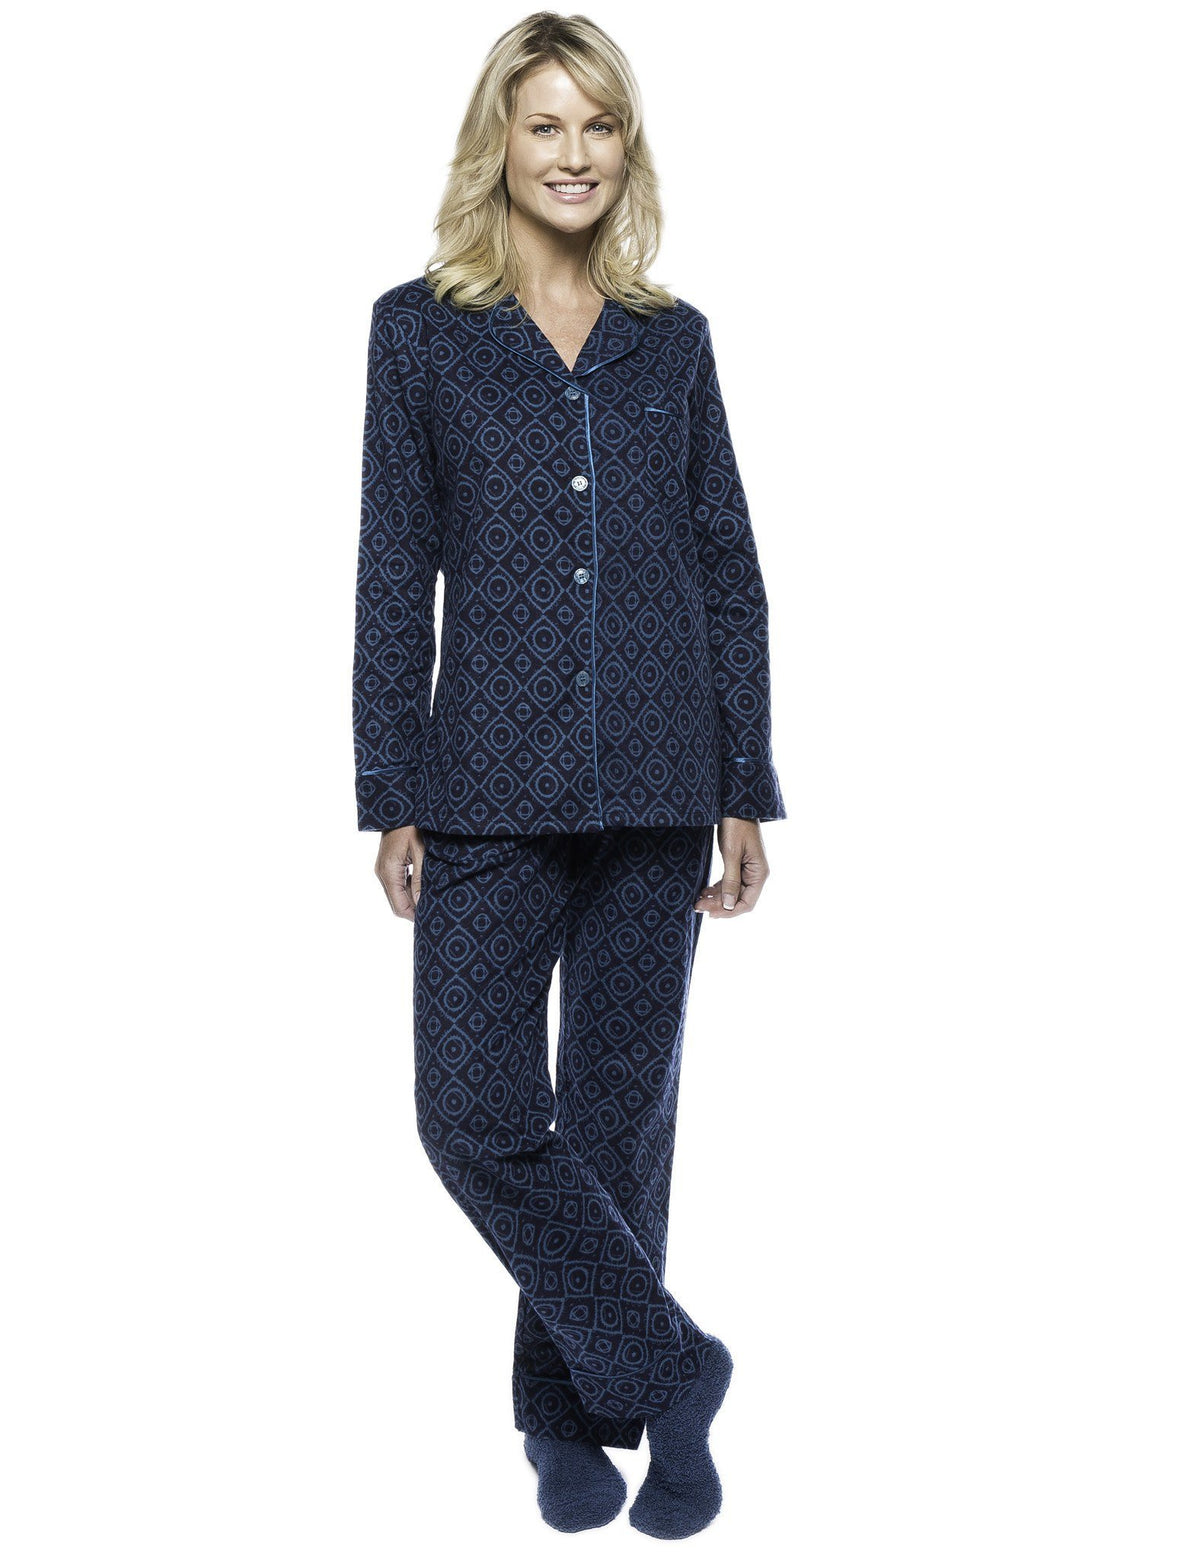 Boxed Pacakged Womens Premium Cotton Flannel Pajama Sleepwear Set with Free Plush Socks - Moroccan Navy/Teal